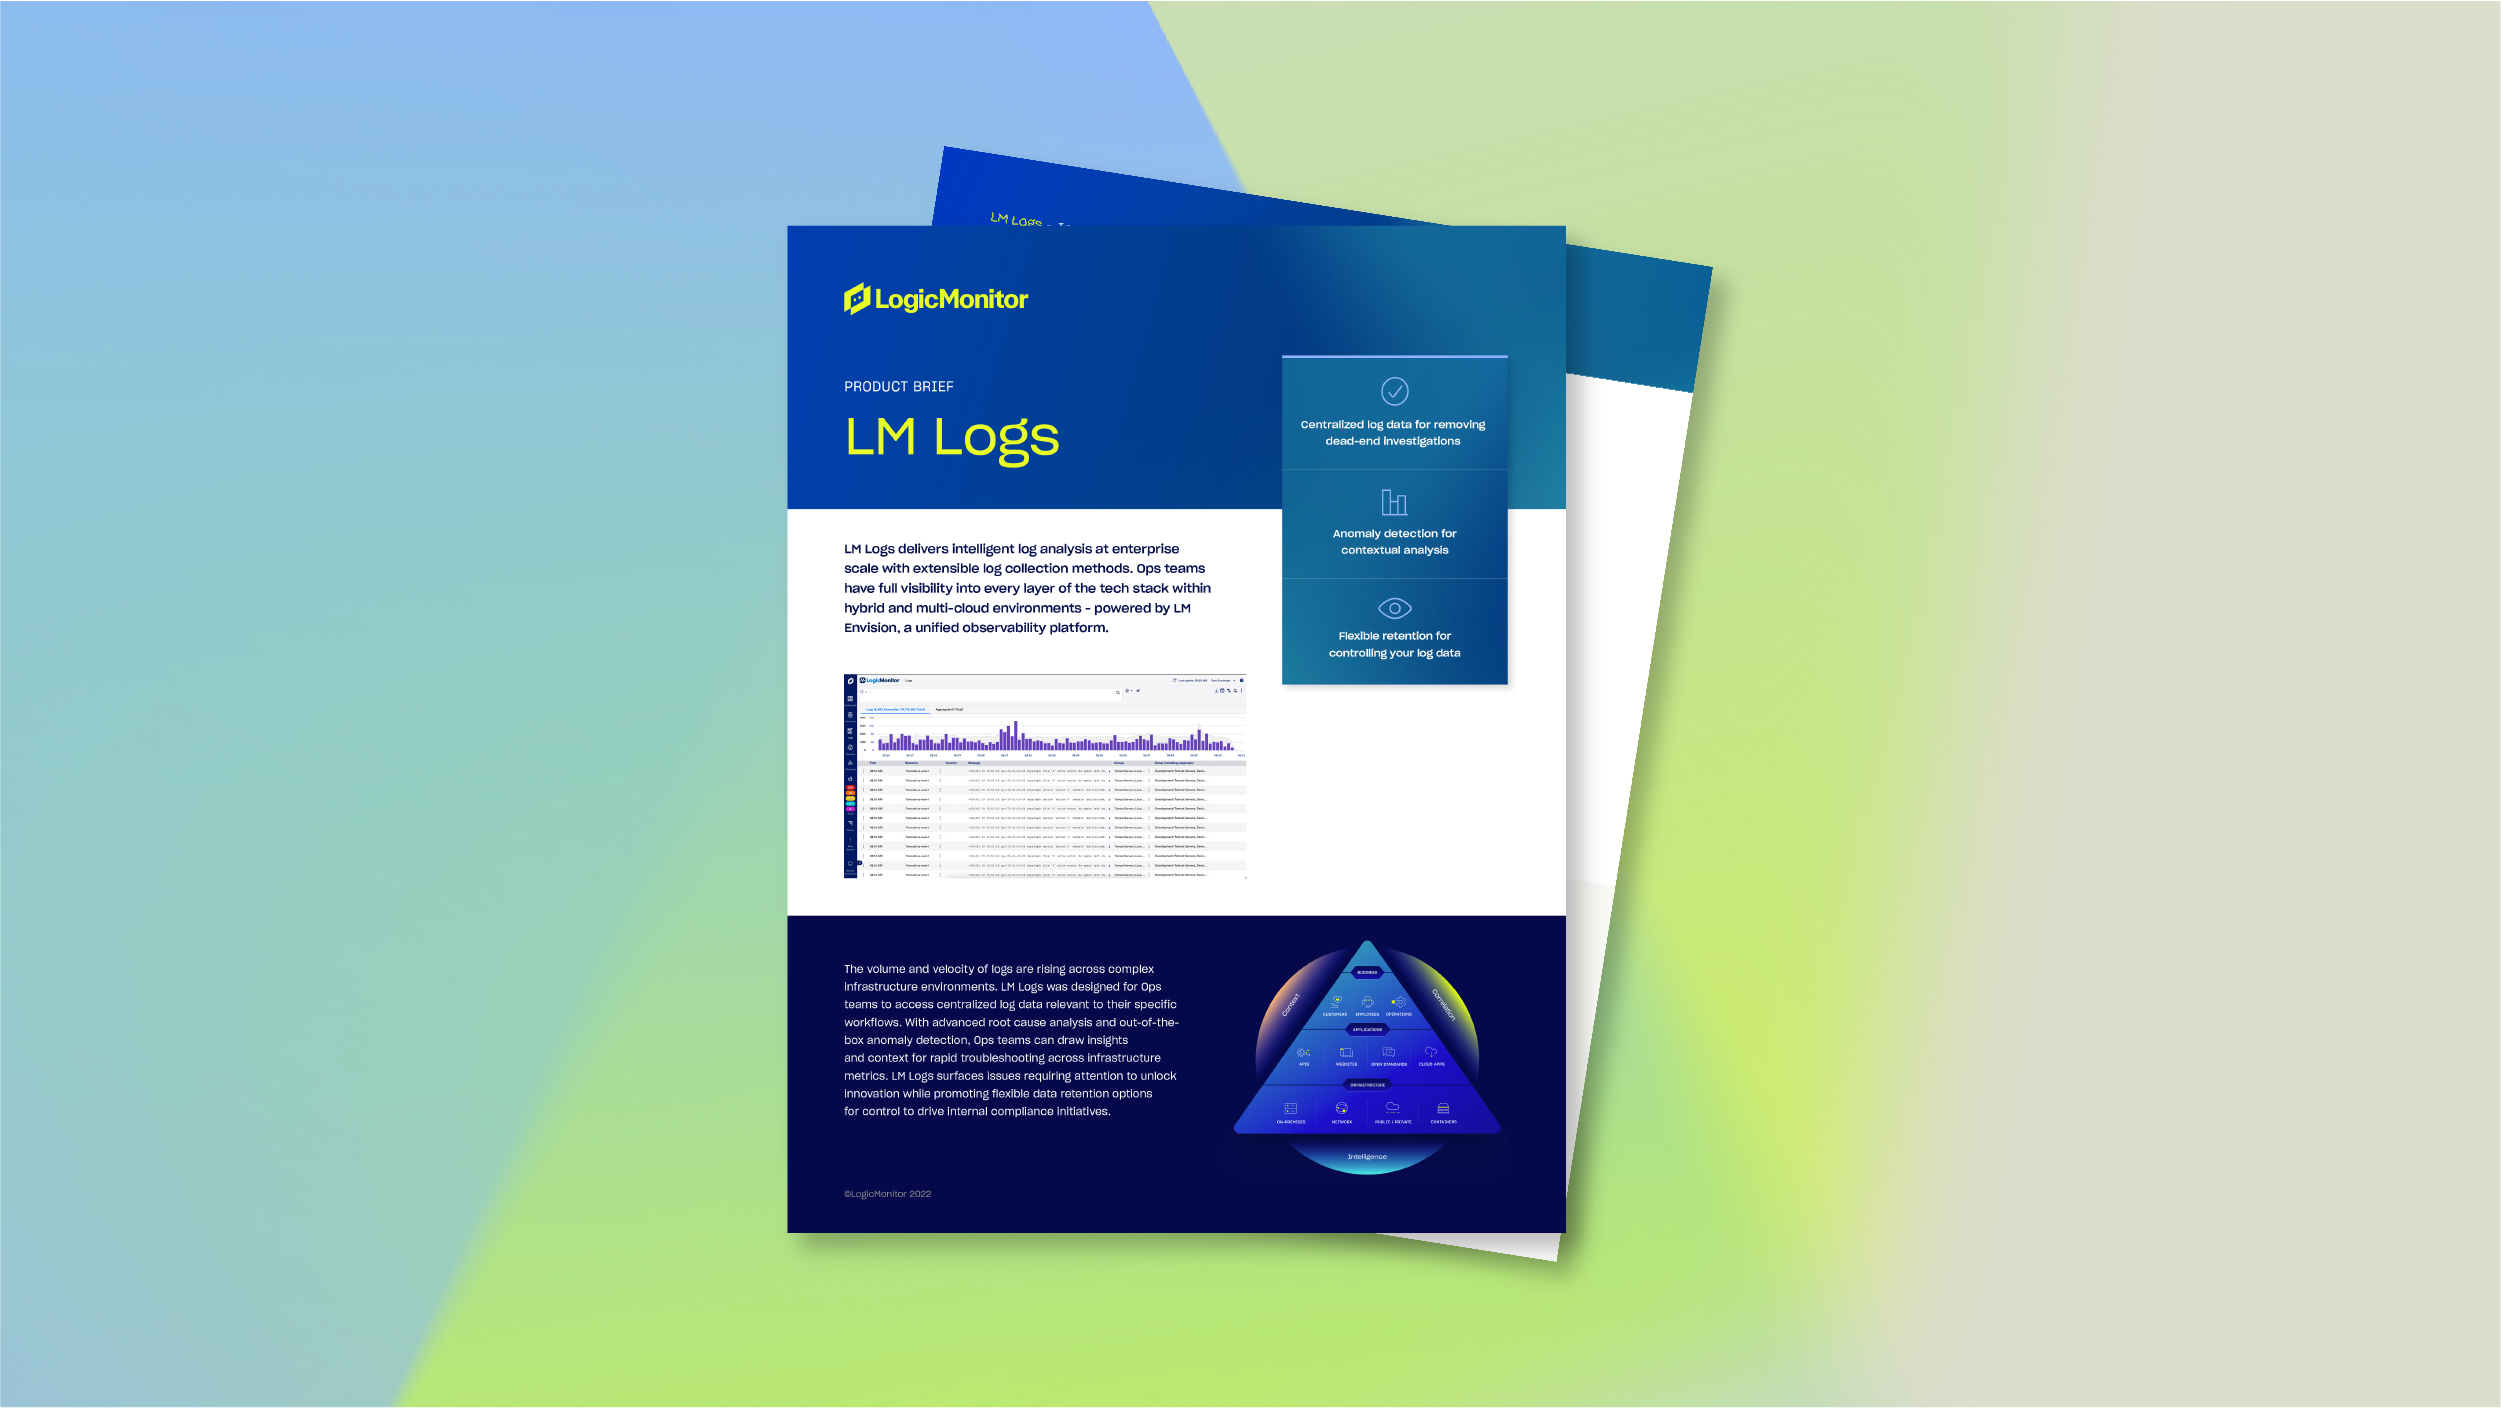 LM Logs product brief